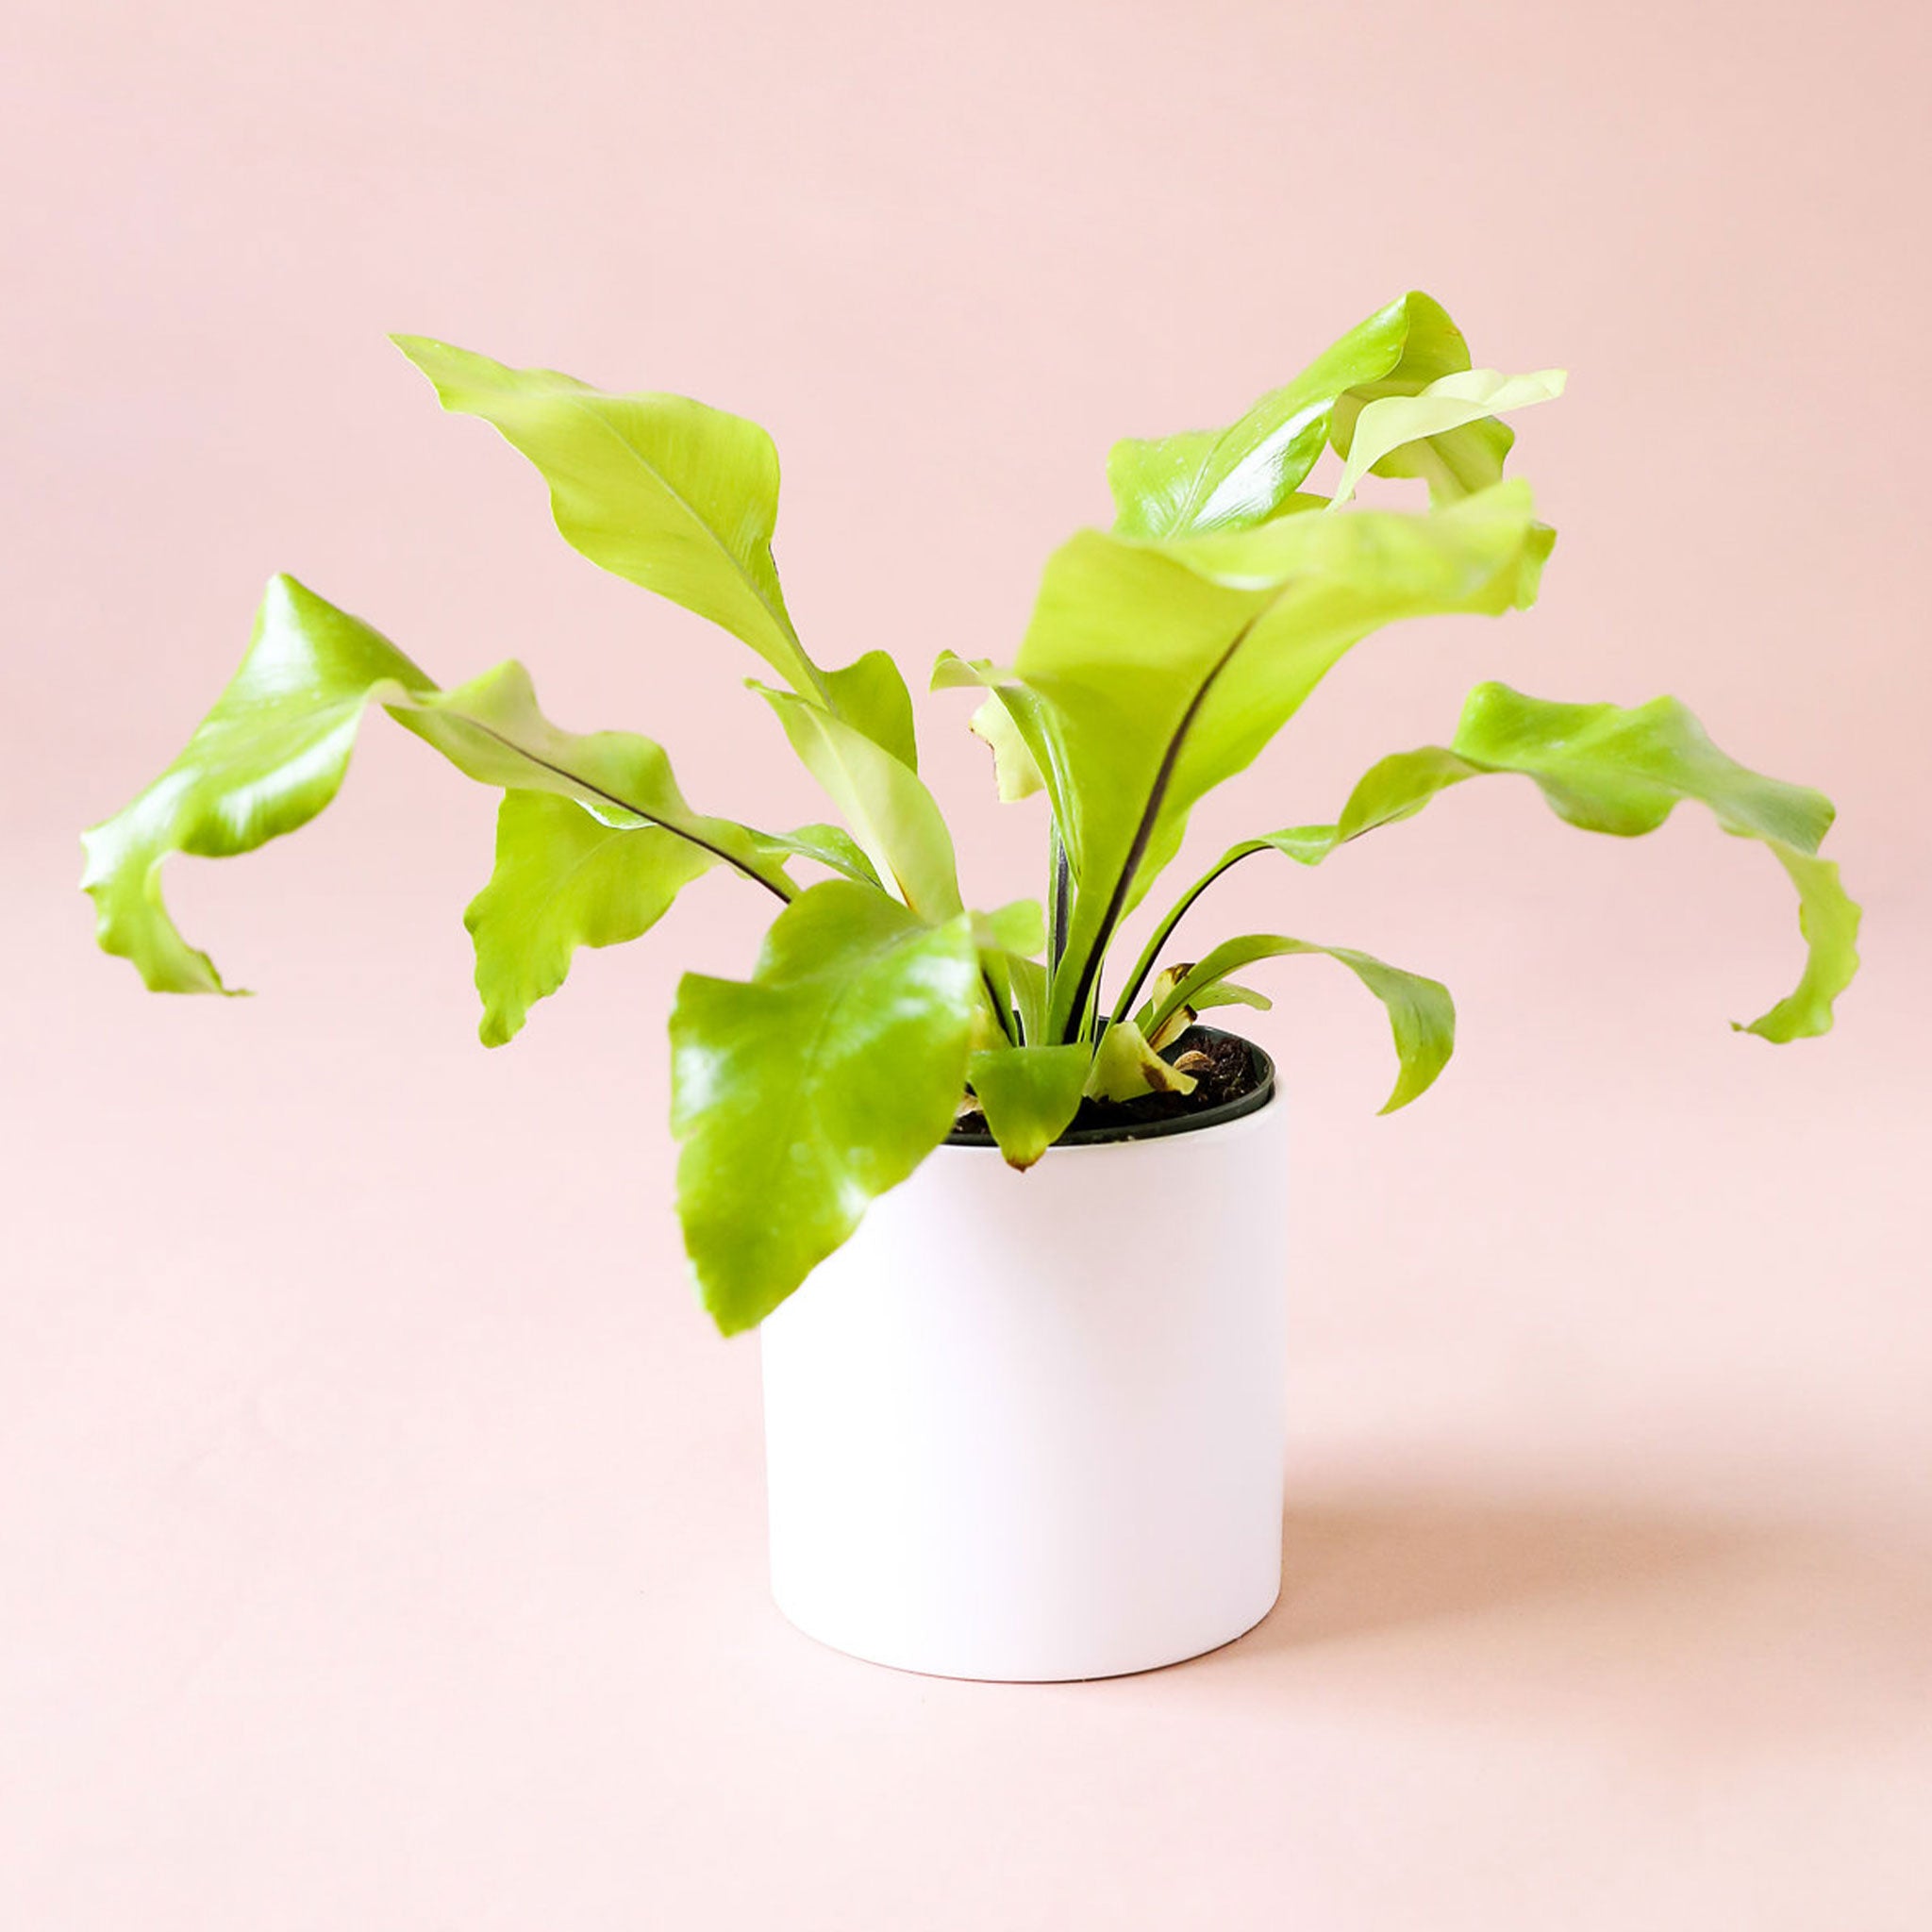 Bird's Nest Fern planted in a smooth white pot. Bird's Nest Fern is a cluster of long wide bright green fronds.